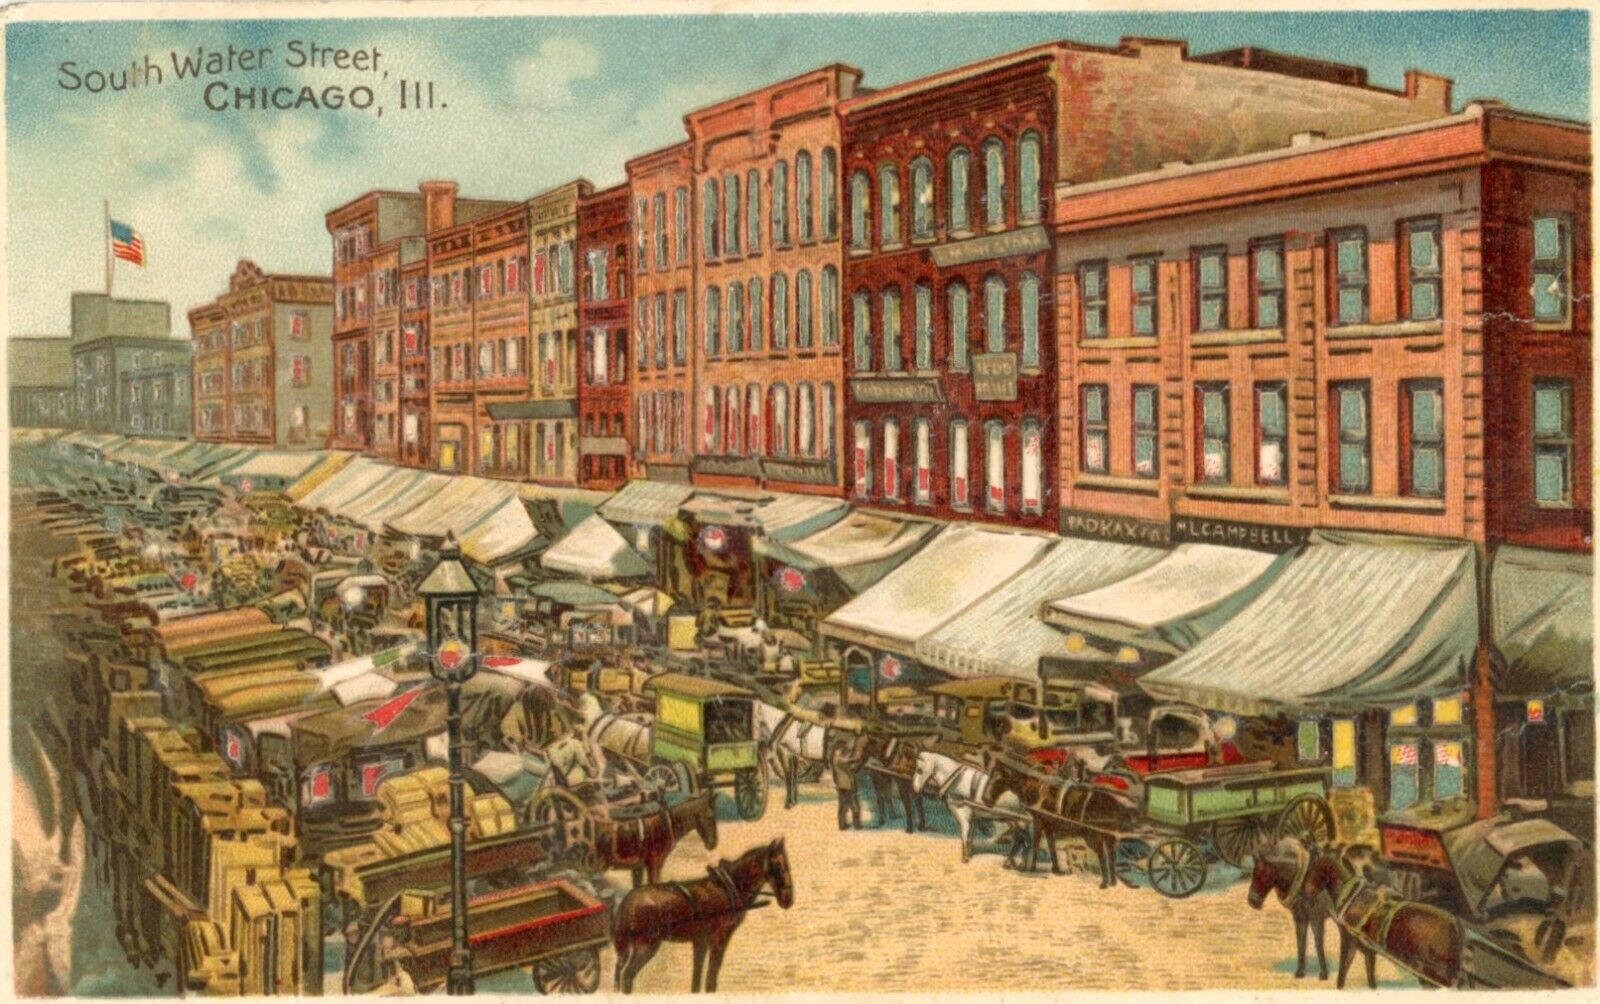 1914 Chicago IL HOLD-TO-LIGHT  postcard,South Water Street, Illinois, Koehler